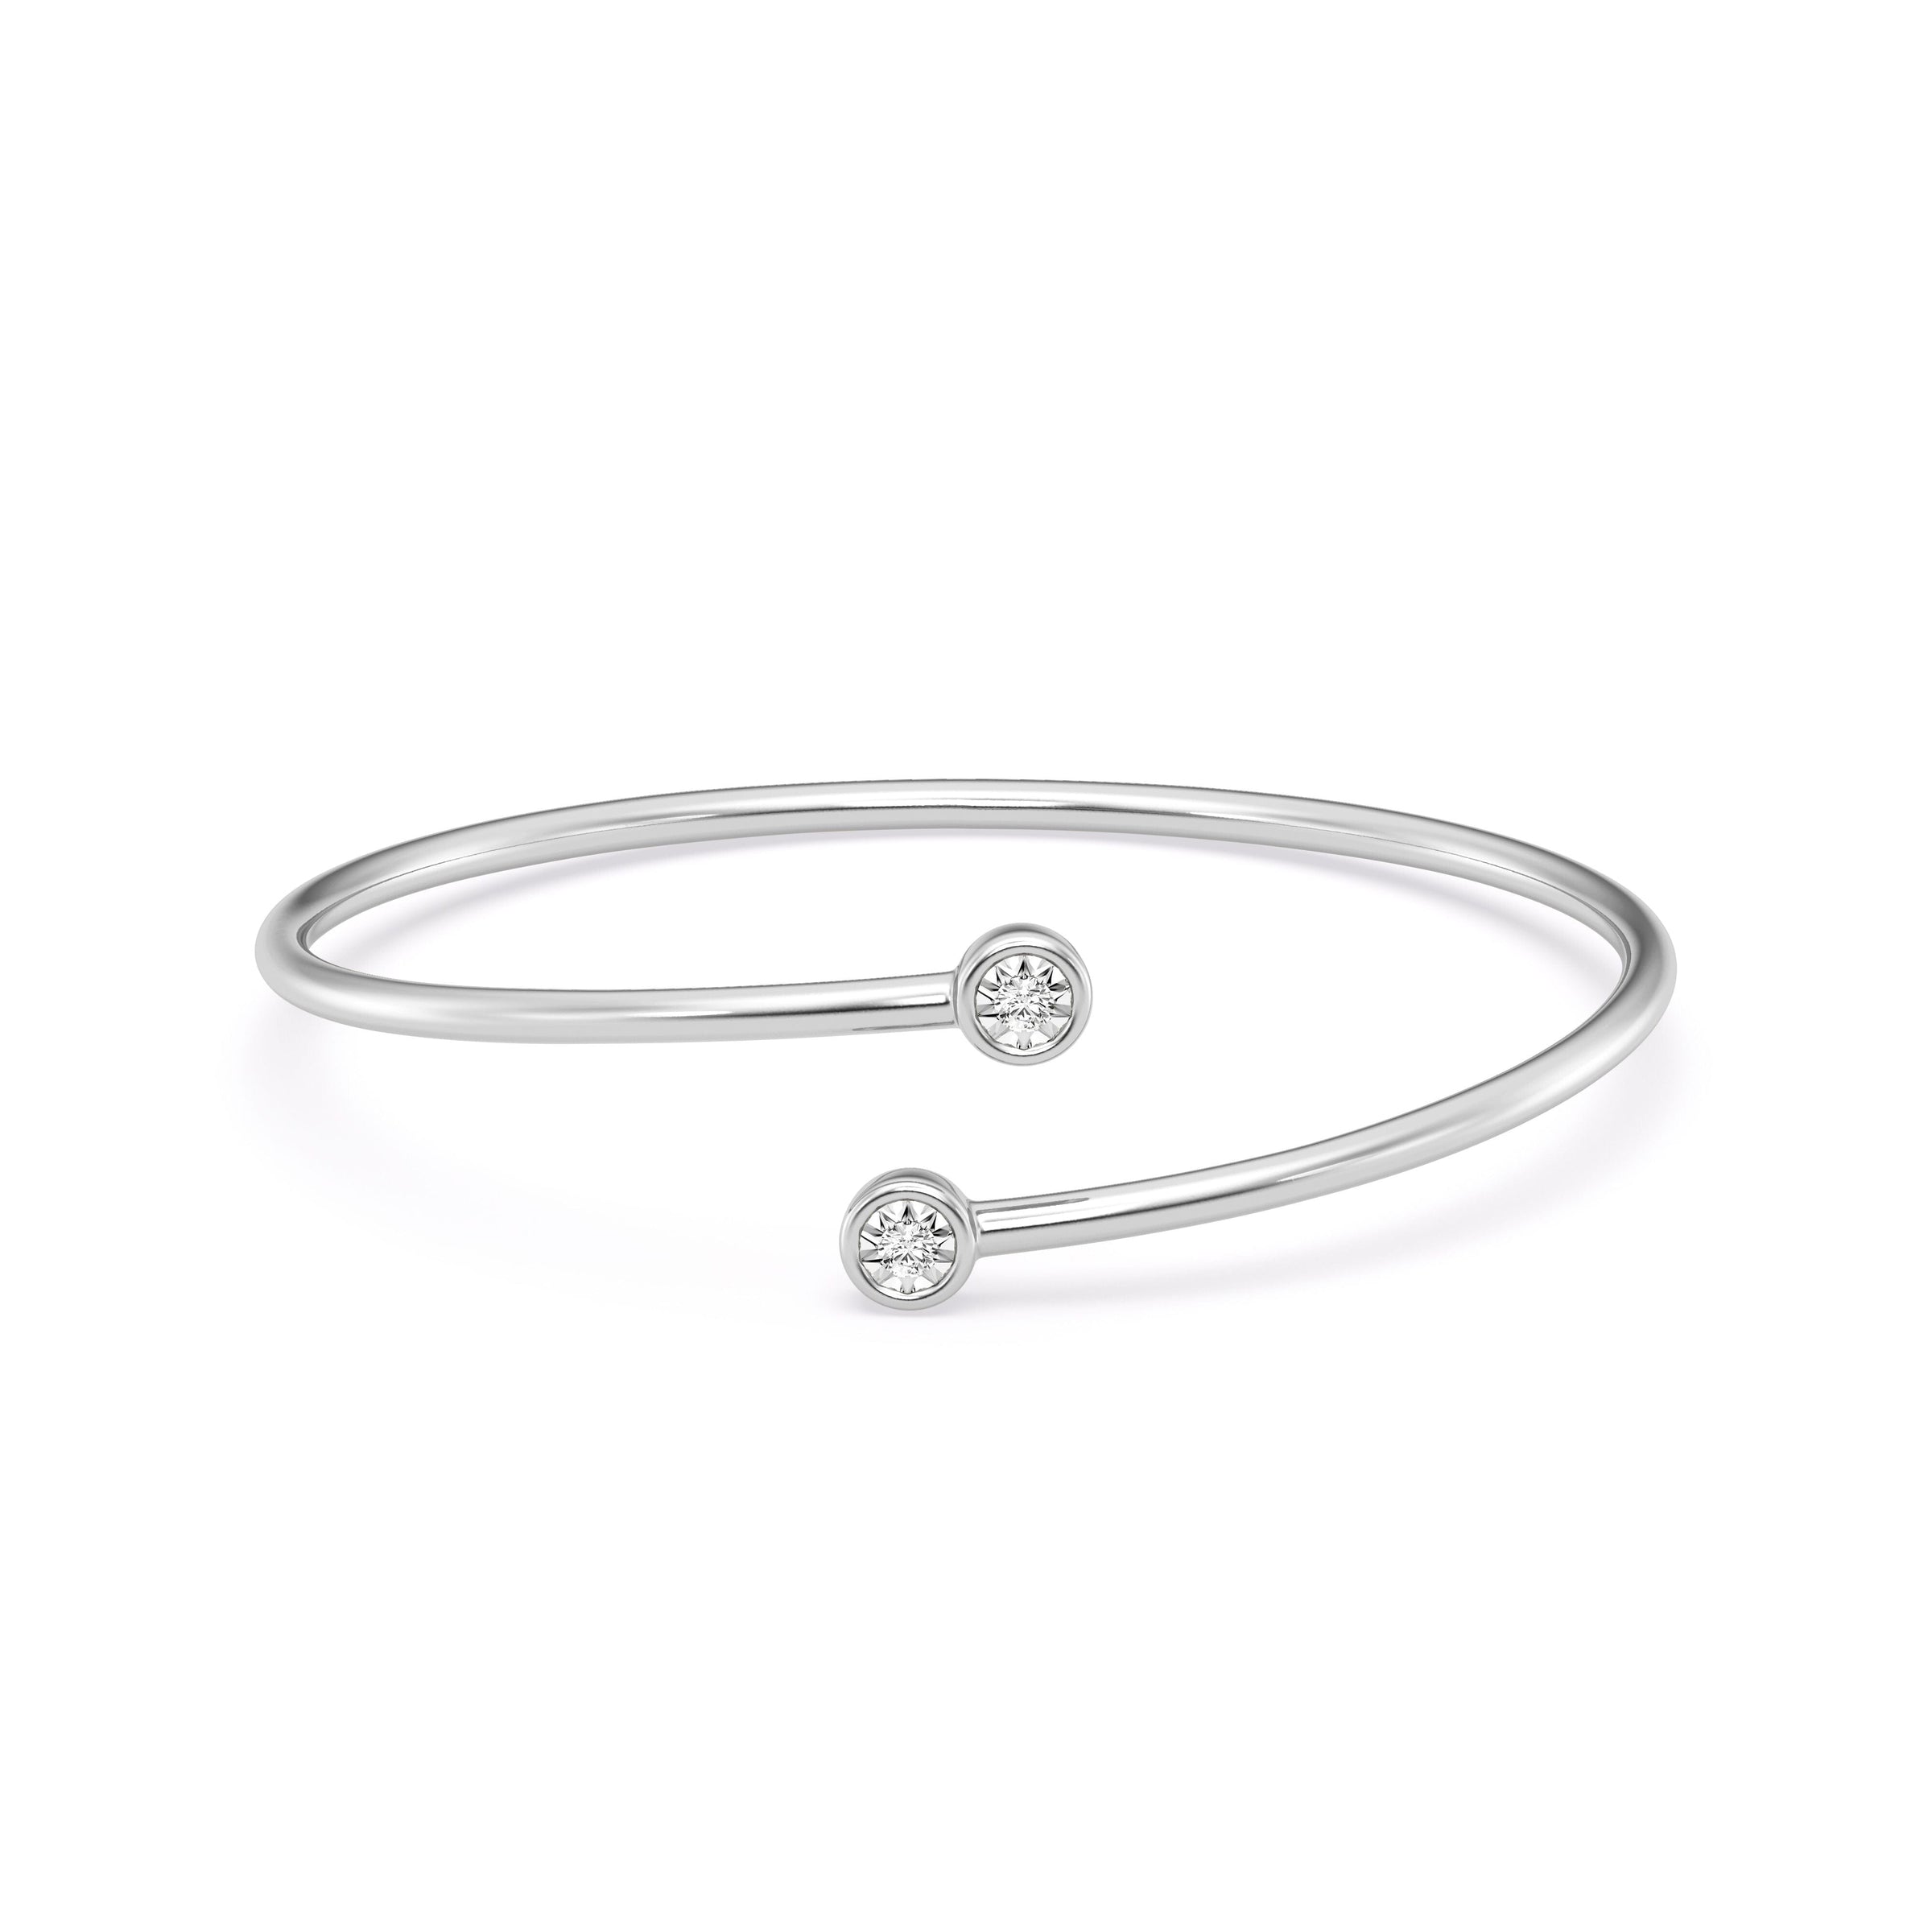 Mirage Bangle with 0.10ct of Laboratory Grown Diamonds in Sterling Silver and Platinum Bangles Bevilles Jewellers 